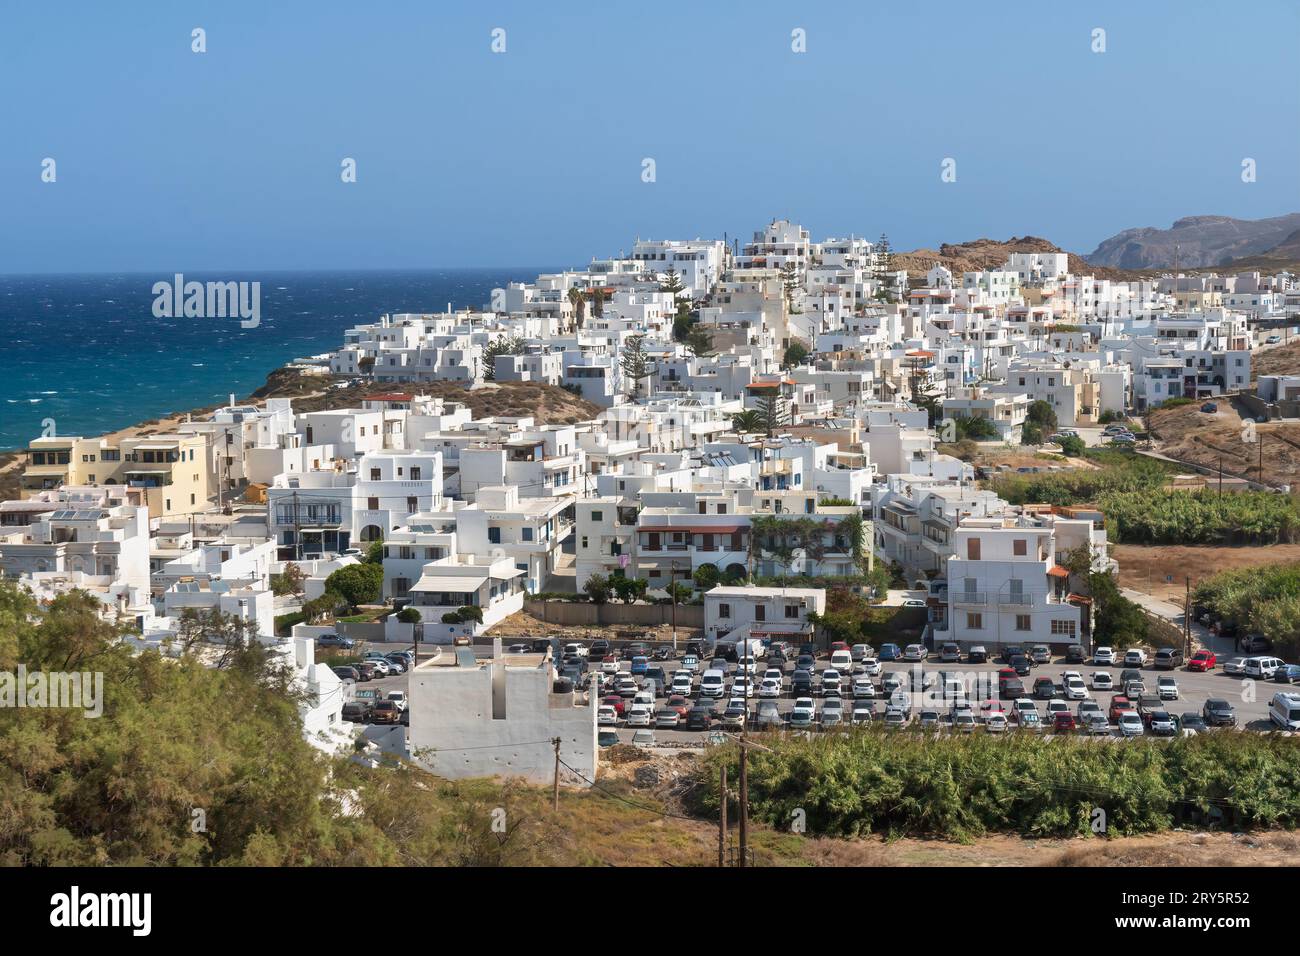 Looking across Naxos one of the Cyclades Islands in Greece Stock Photo